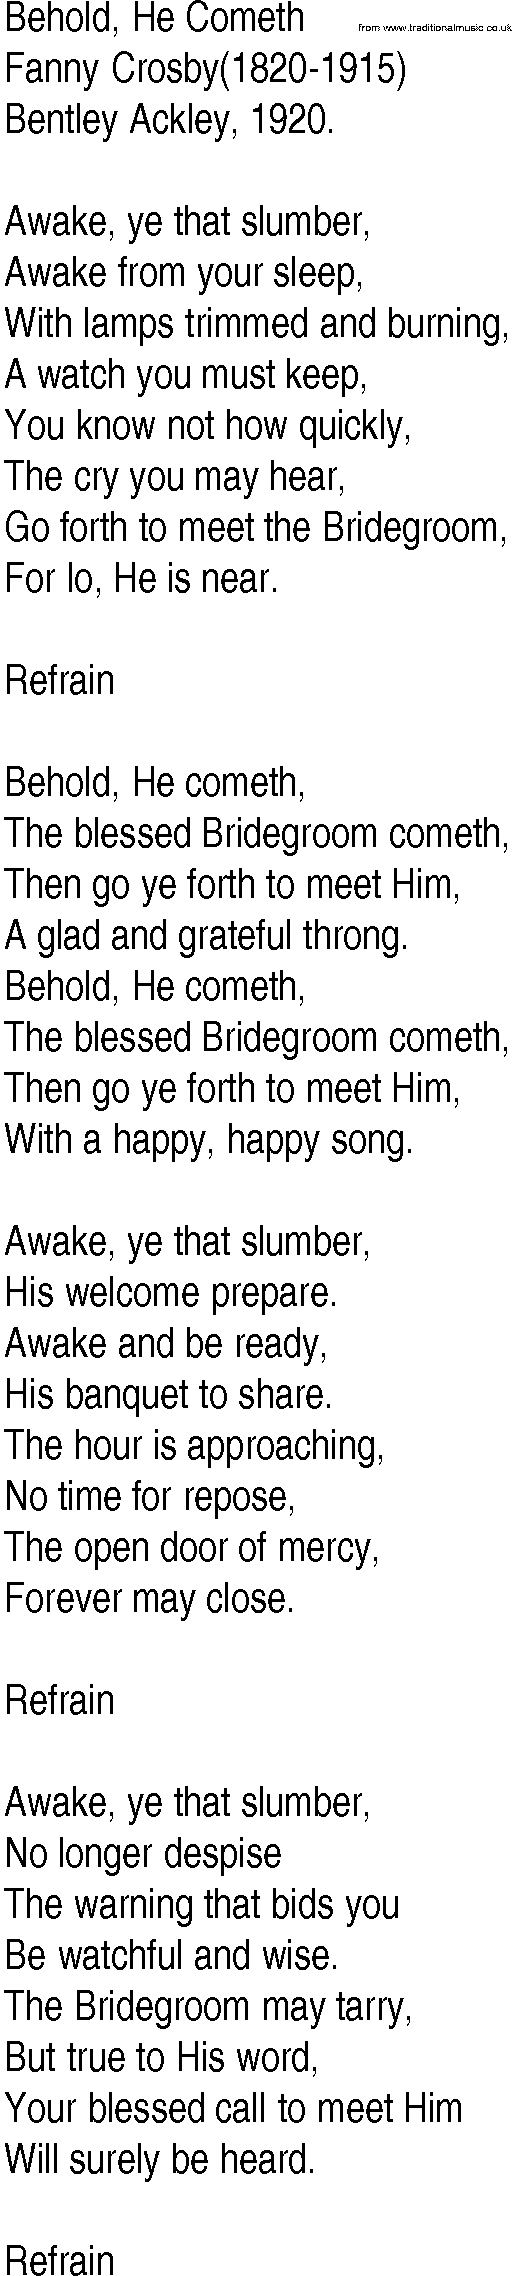 Hymn and Gospel Song: Behold, He Cometh by Fanny Crosby lyrics